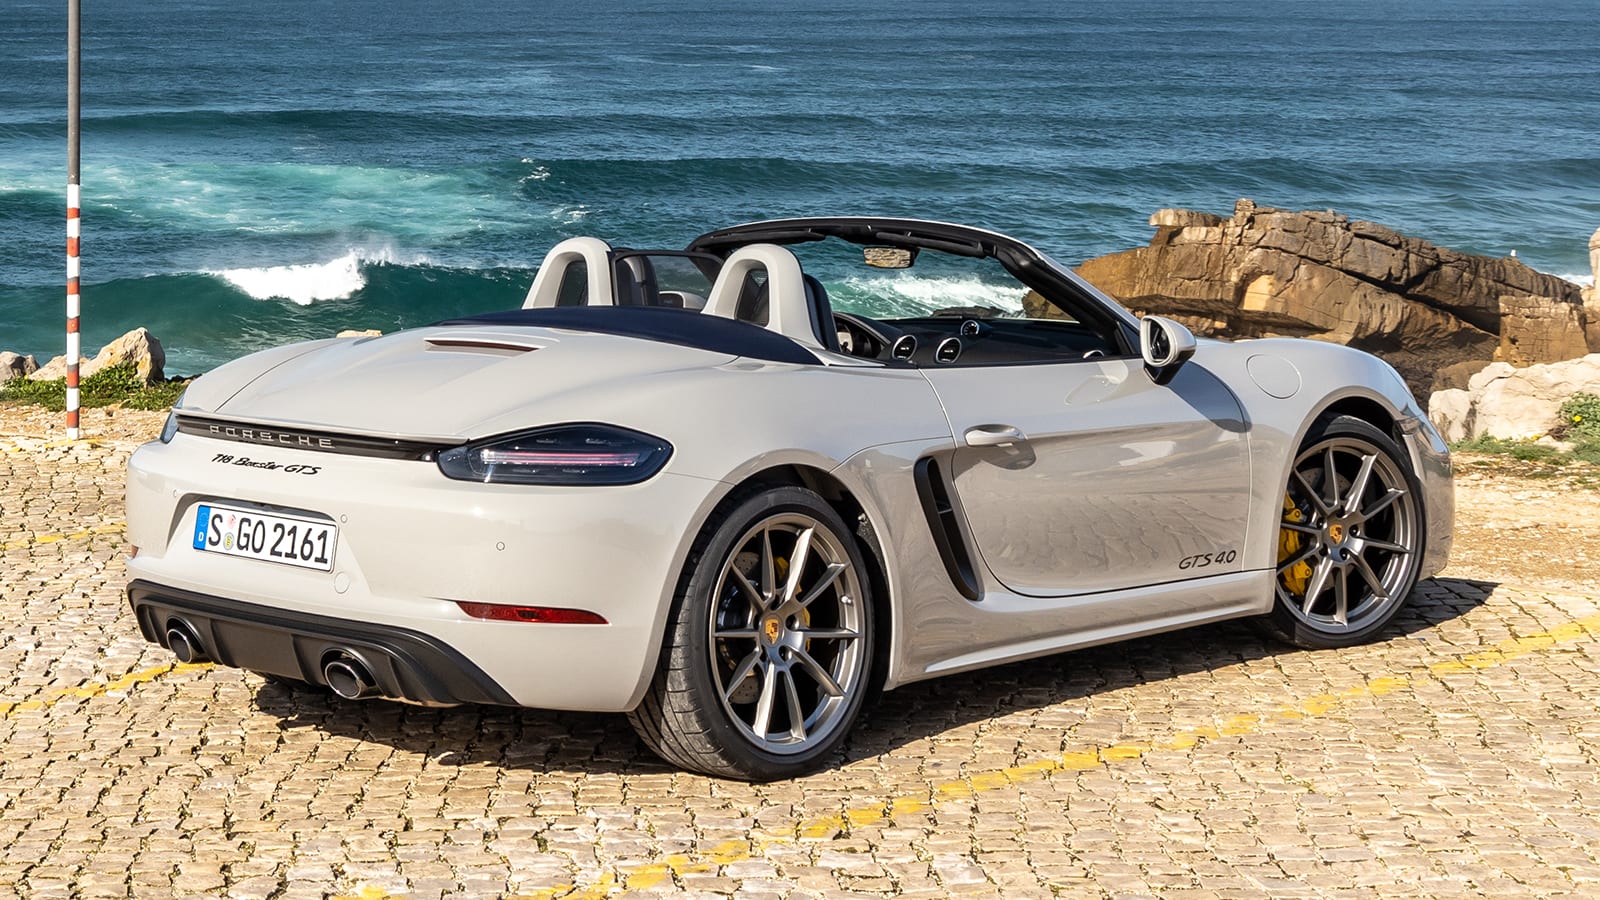 21 Porsche 718 Boxster 4 0 Gts Road Test Driving Impressions Specs Pricing